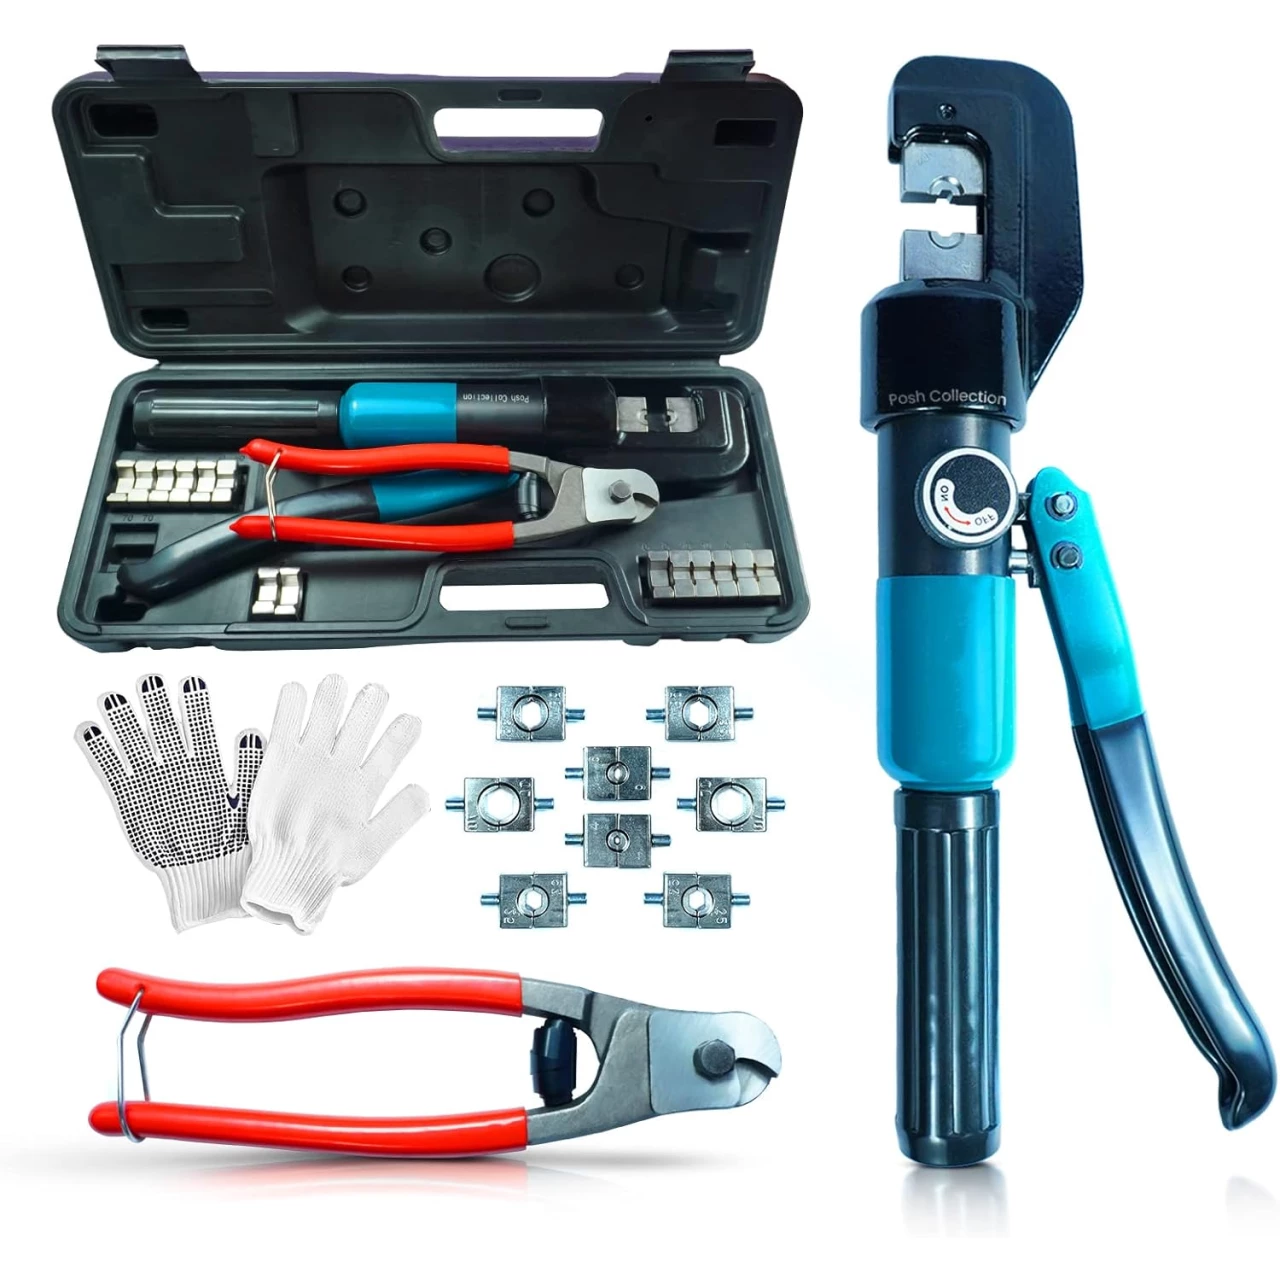 Posh Collection Hydraulic Crimping Tool Set 8T